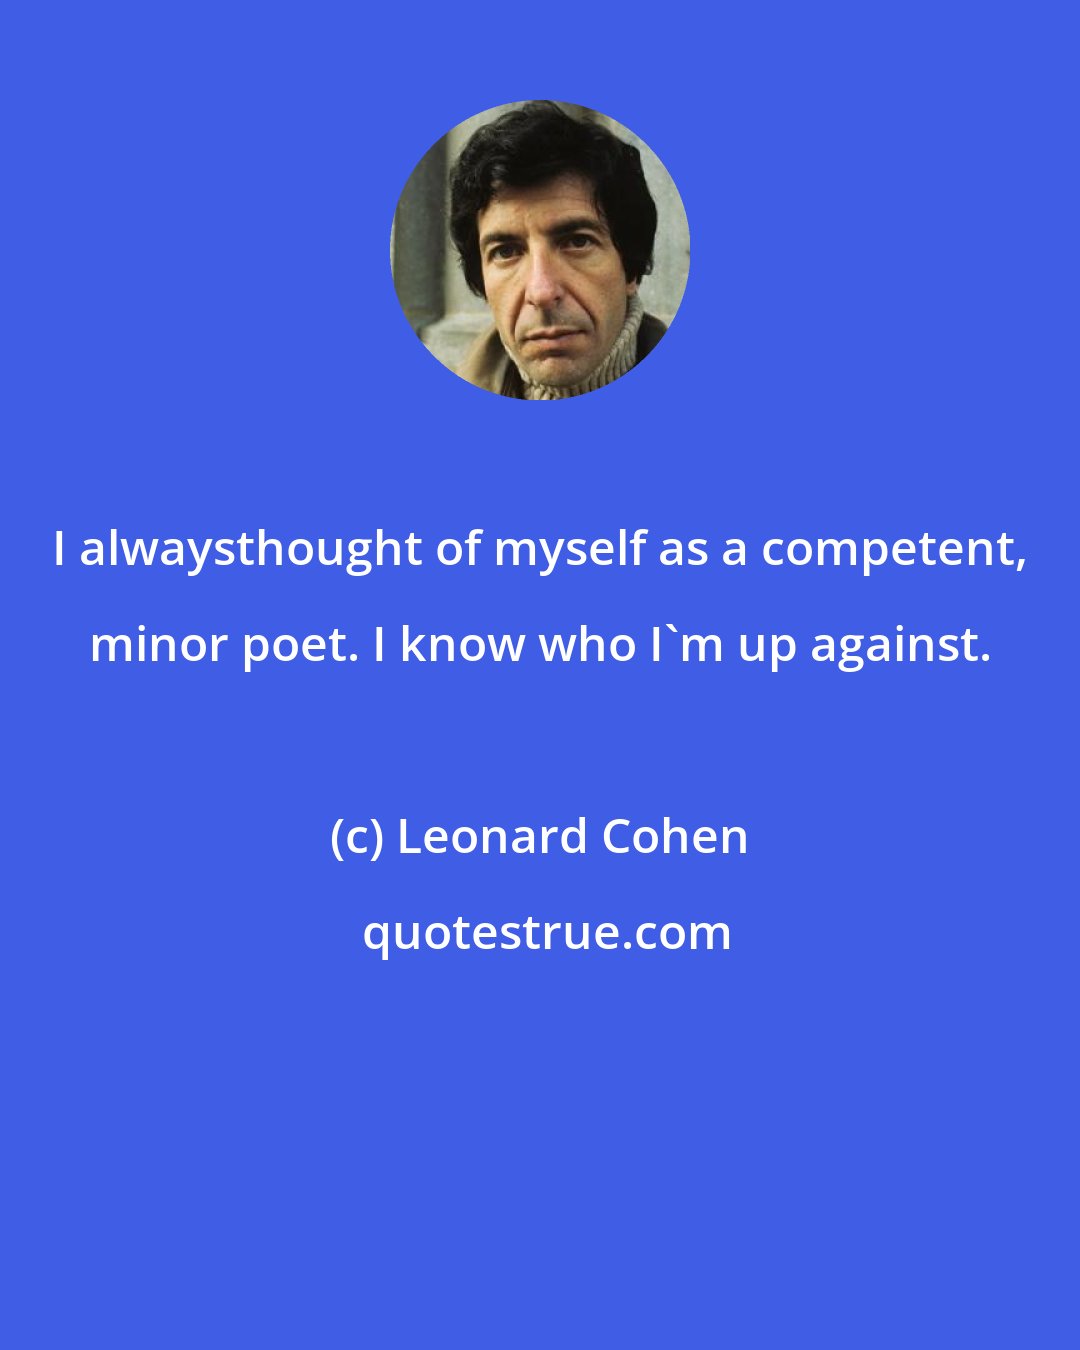 Leonard Cohen: I alwaysthought of myself as a competent, minor poet. I know who I'm up against.